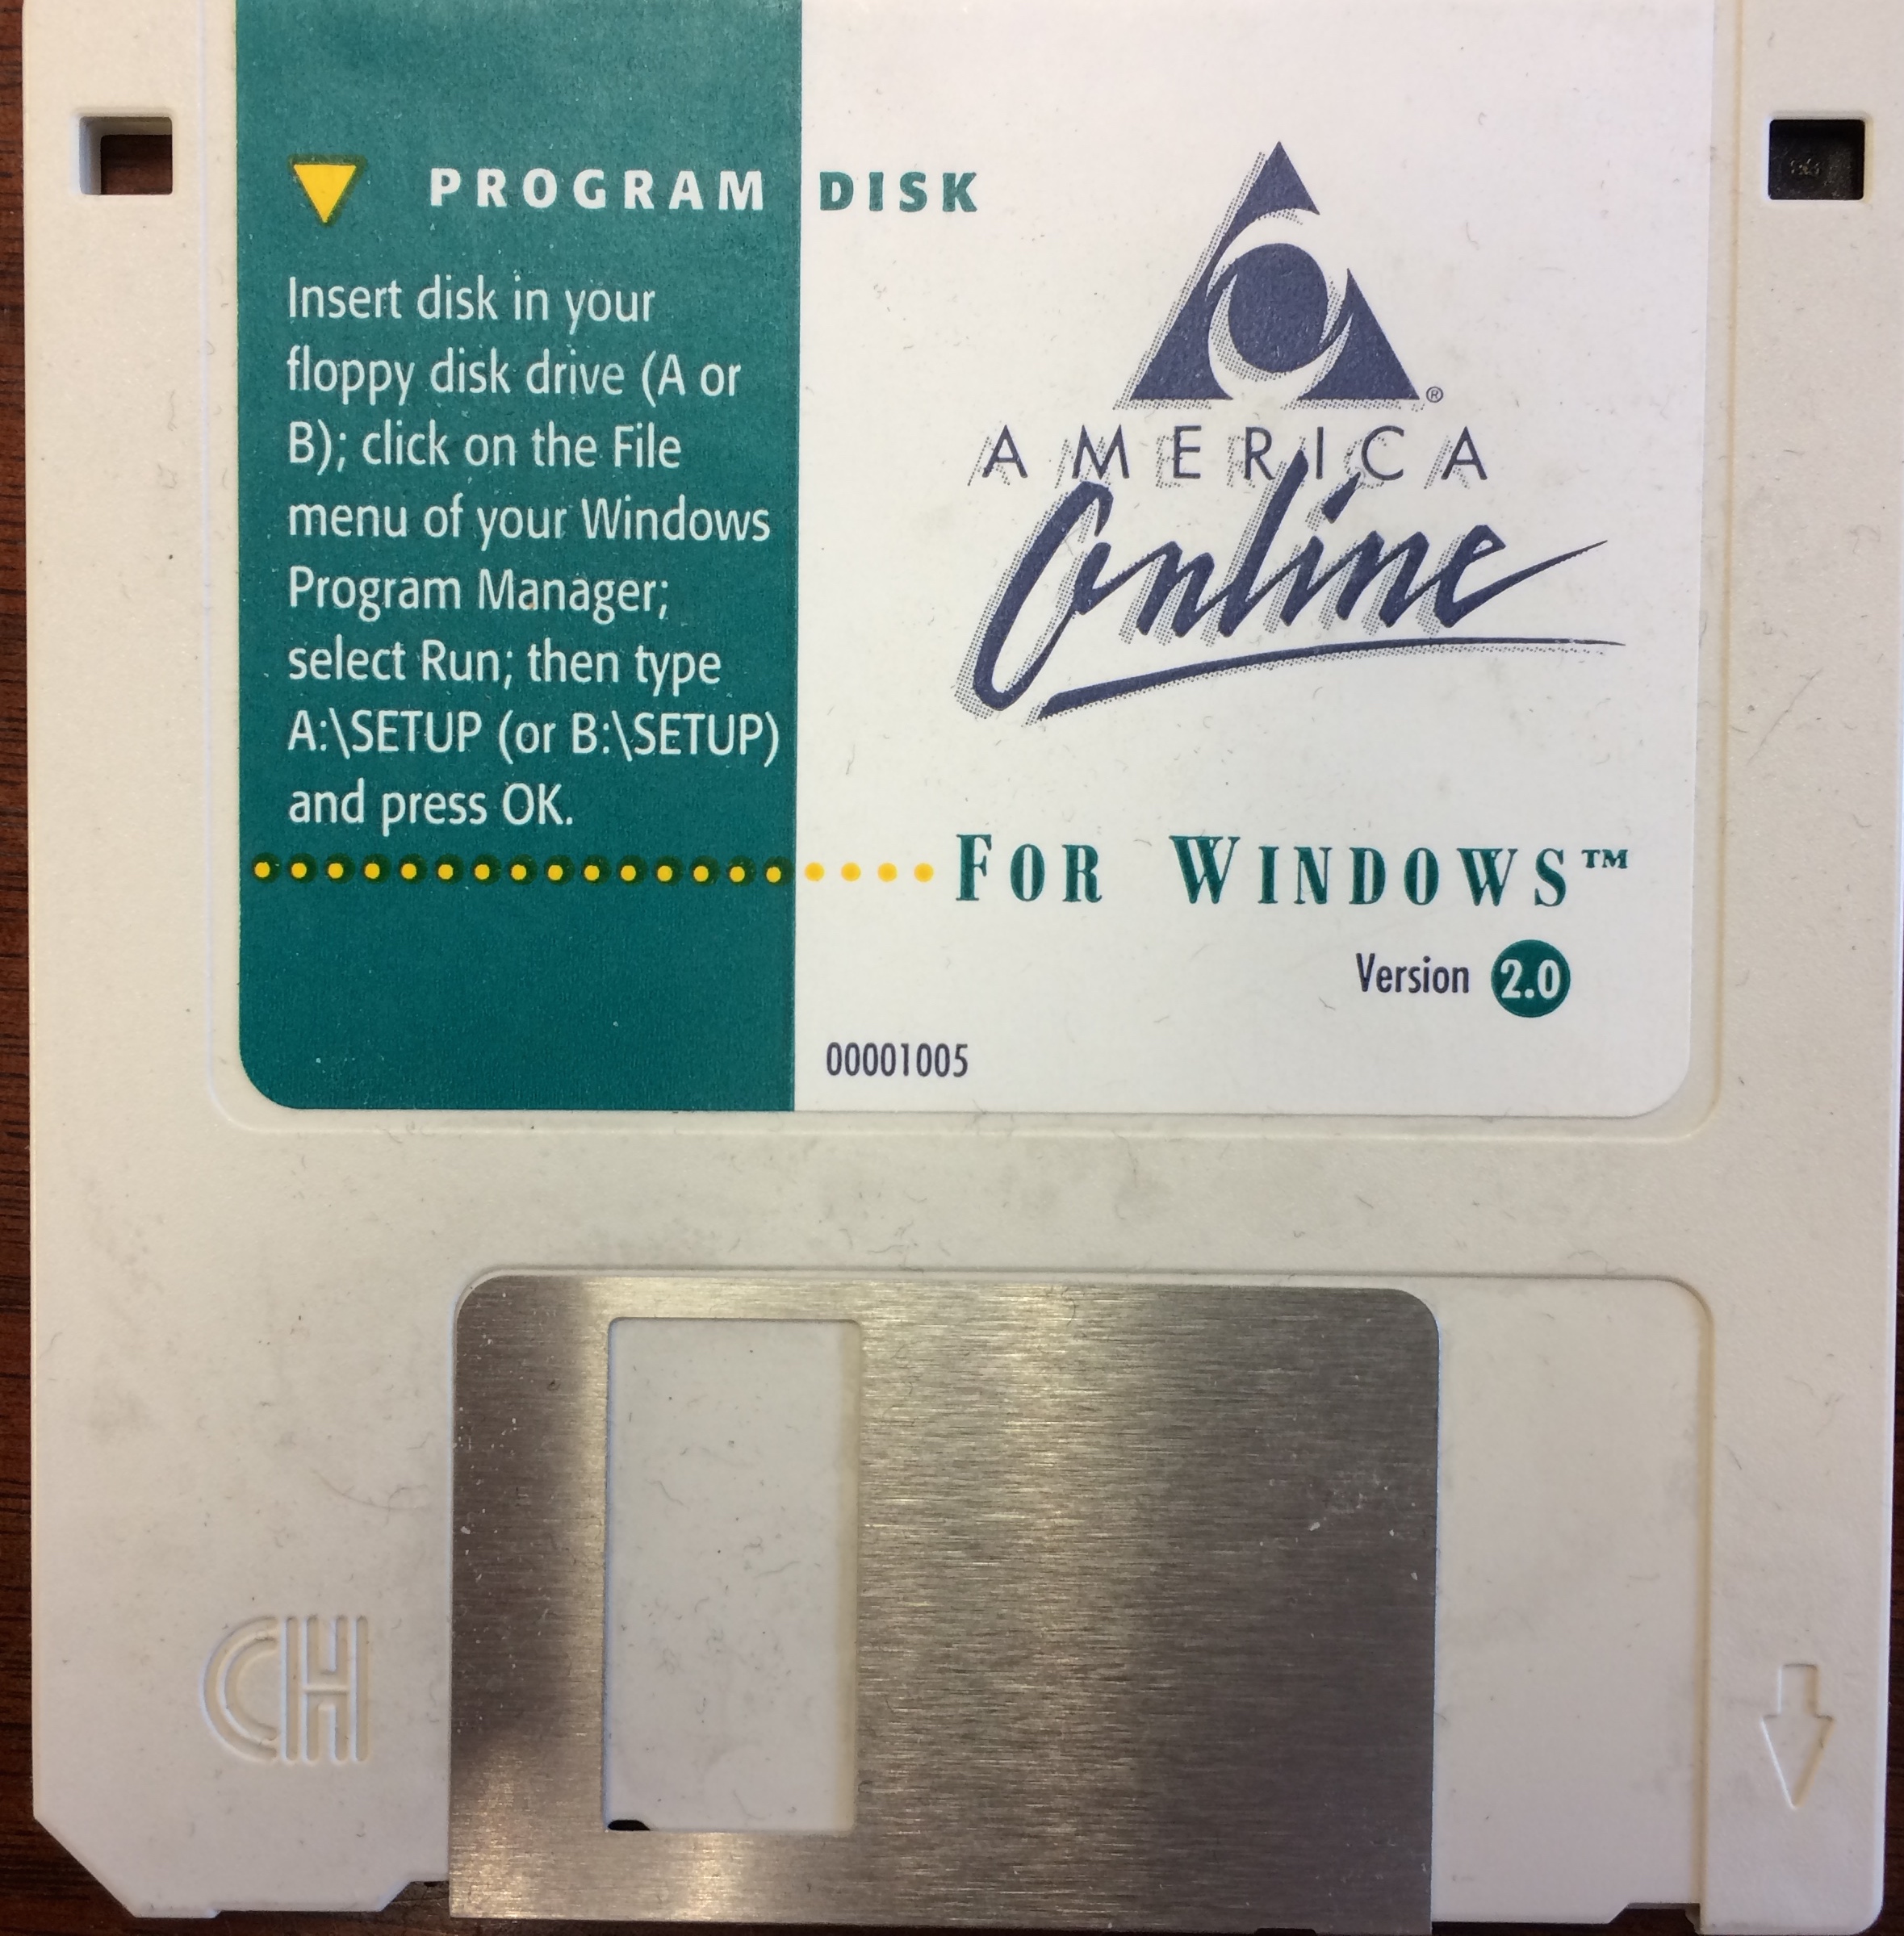 The AOL 2.0 floppy disk that I use as a drink coaster. Photo credit: me.